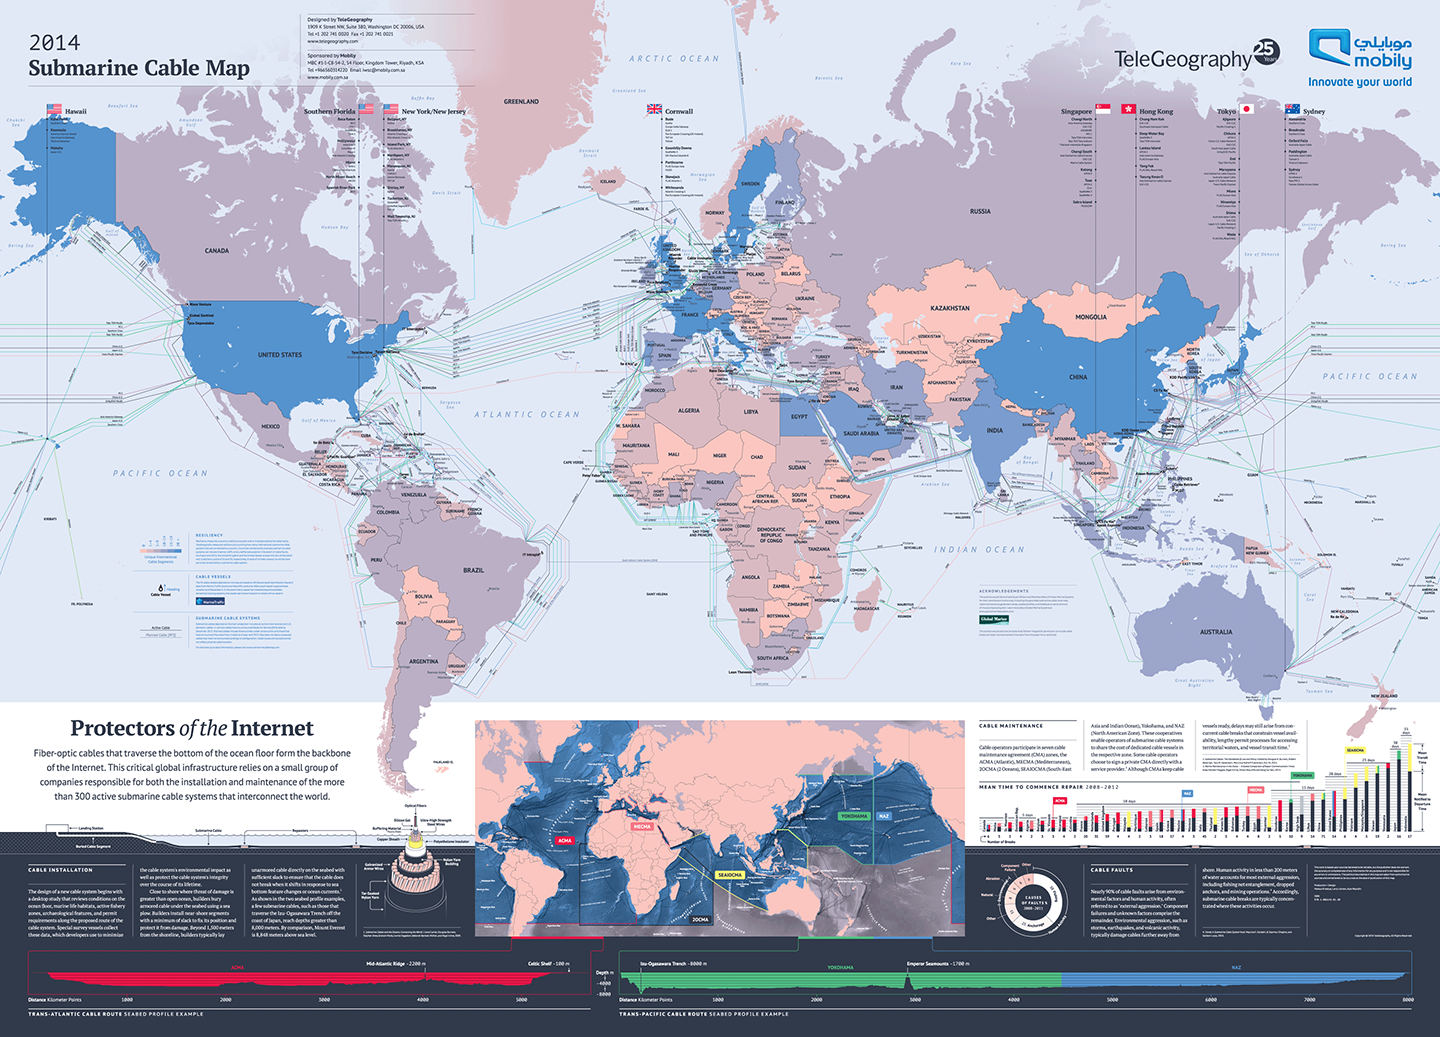 2014 Submarine Cable Map, TeleGeography